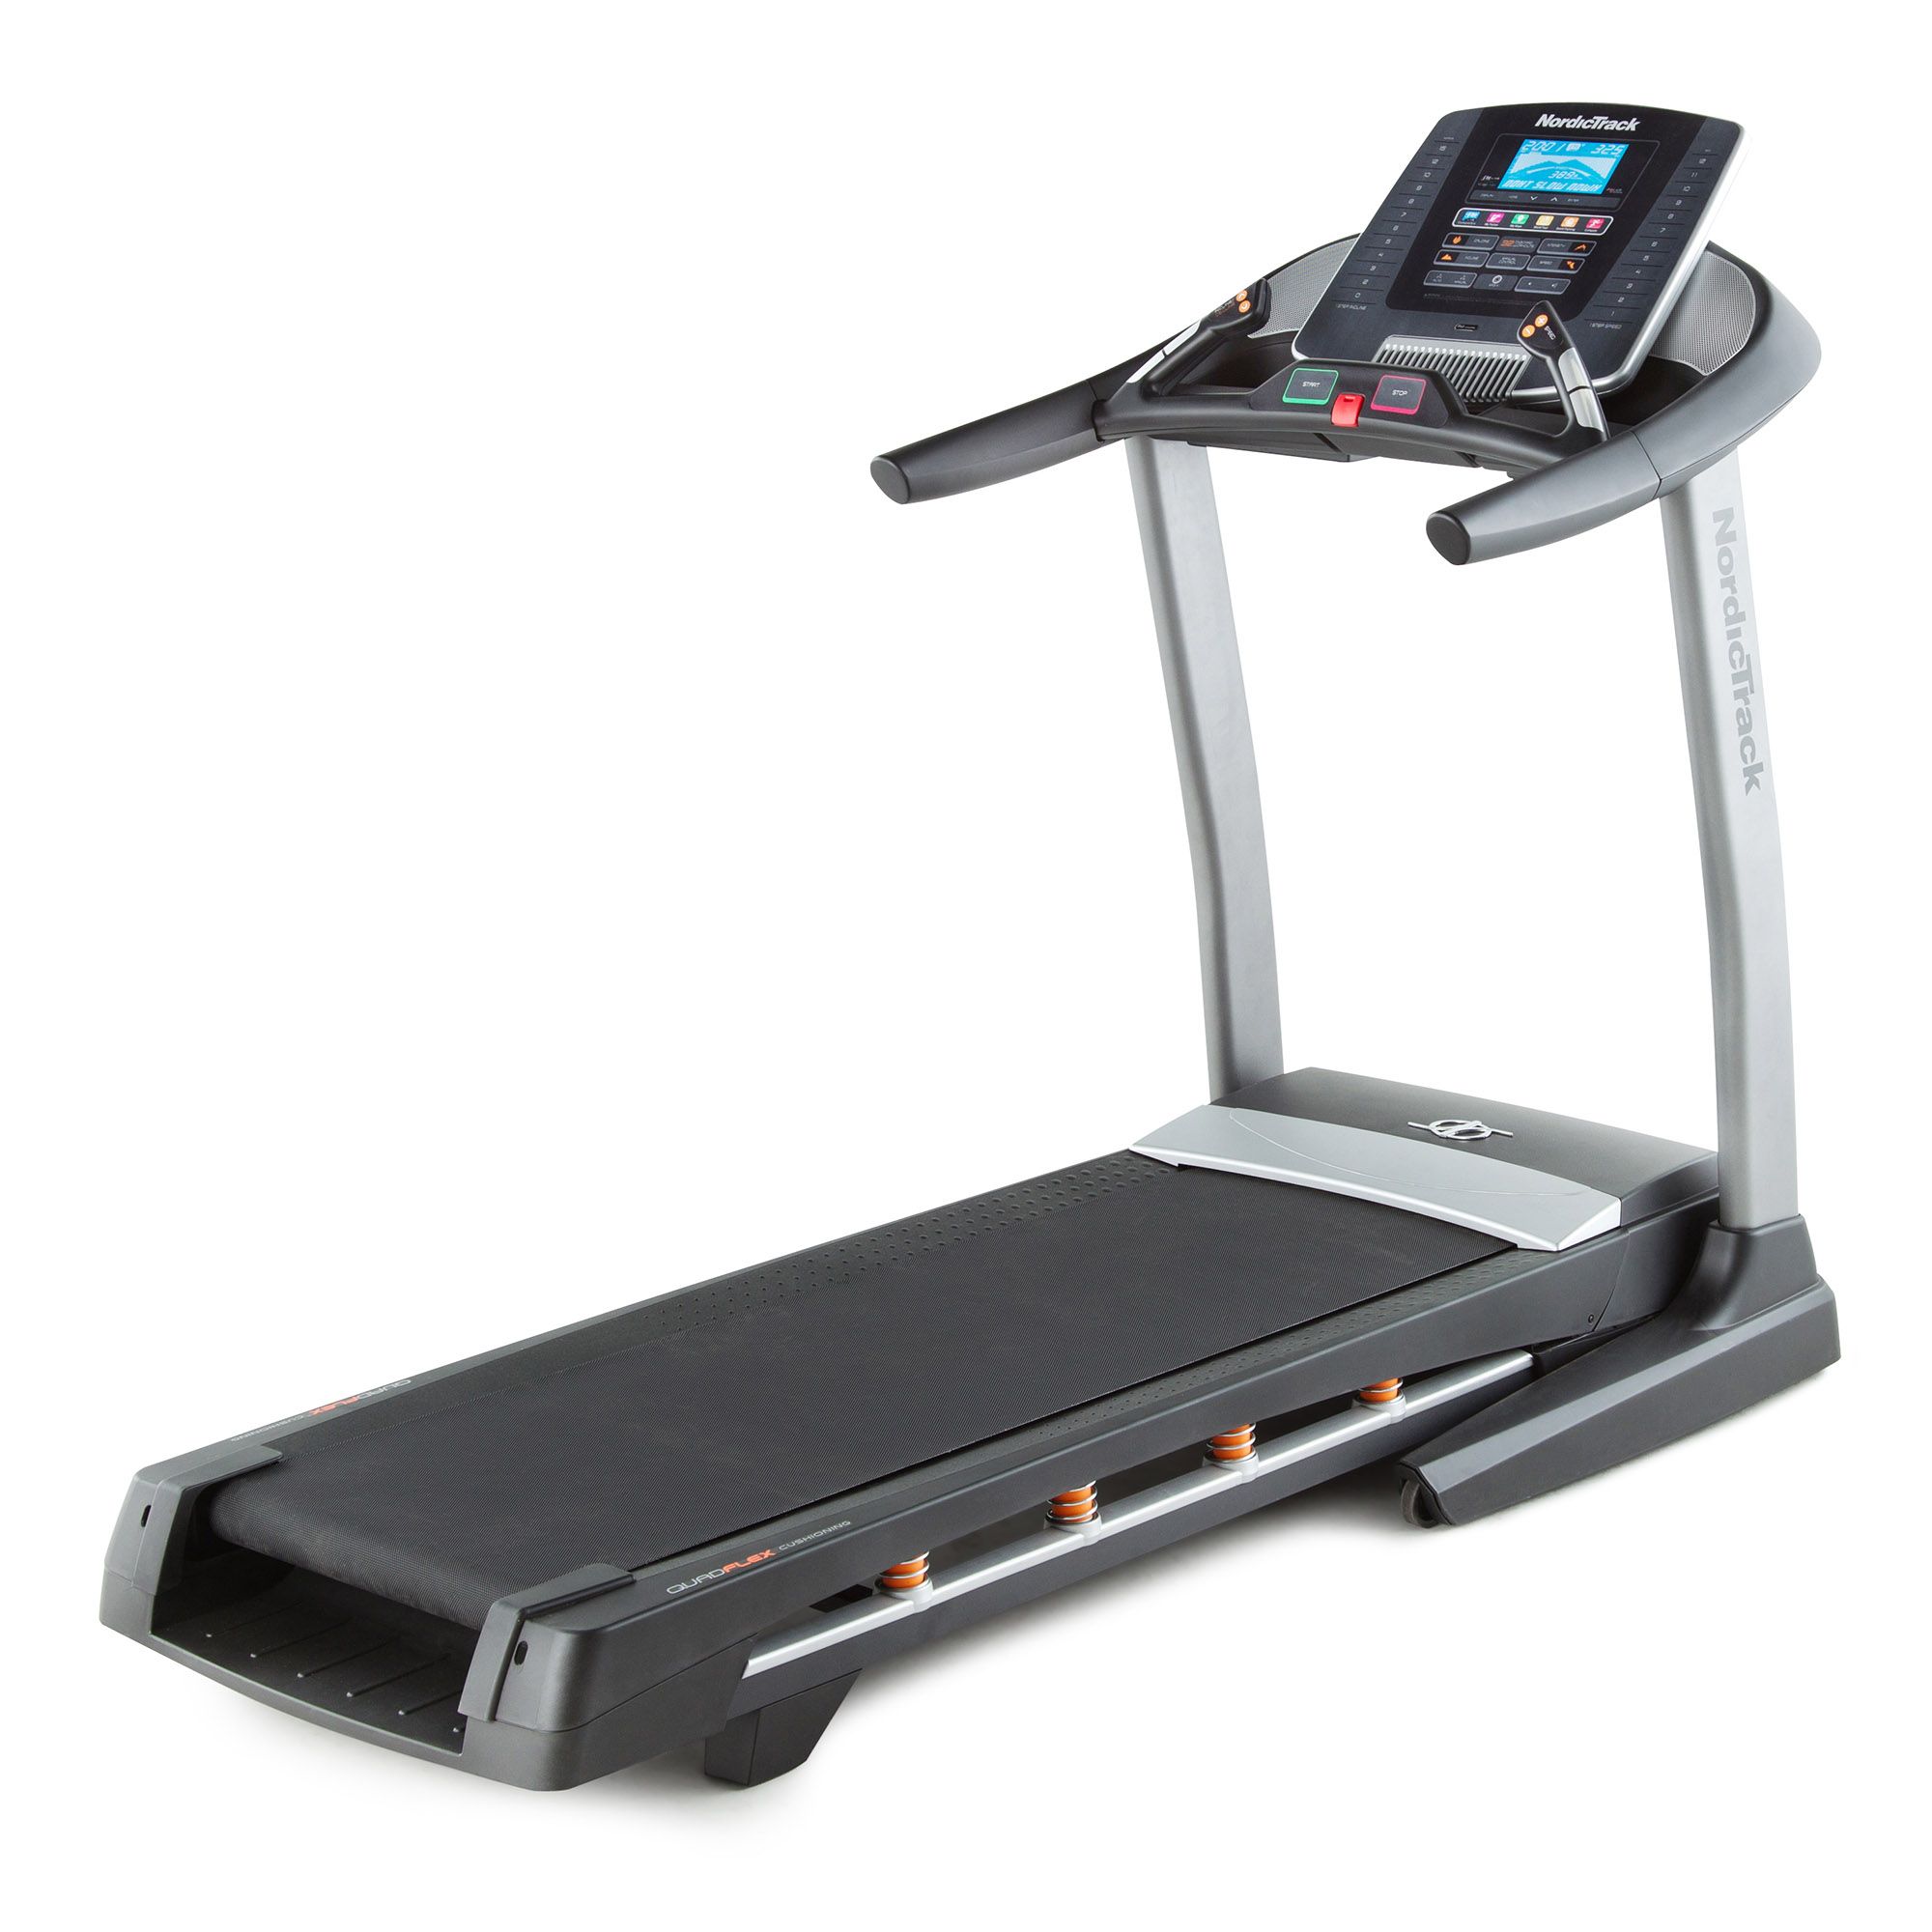 nordictrack c500 folding treadmill review